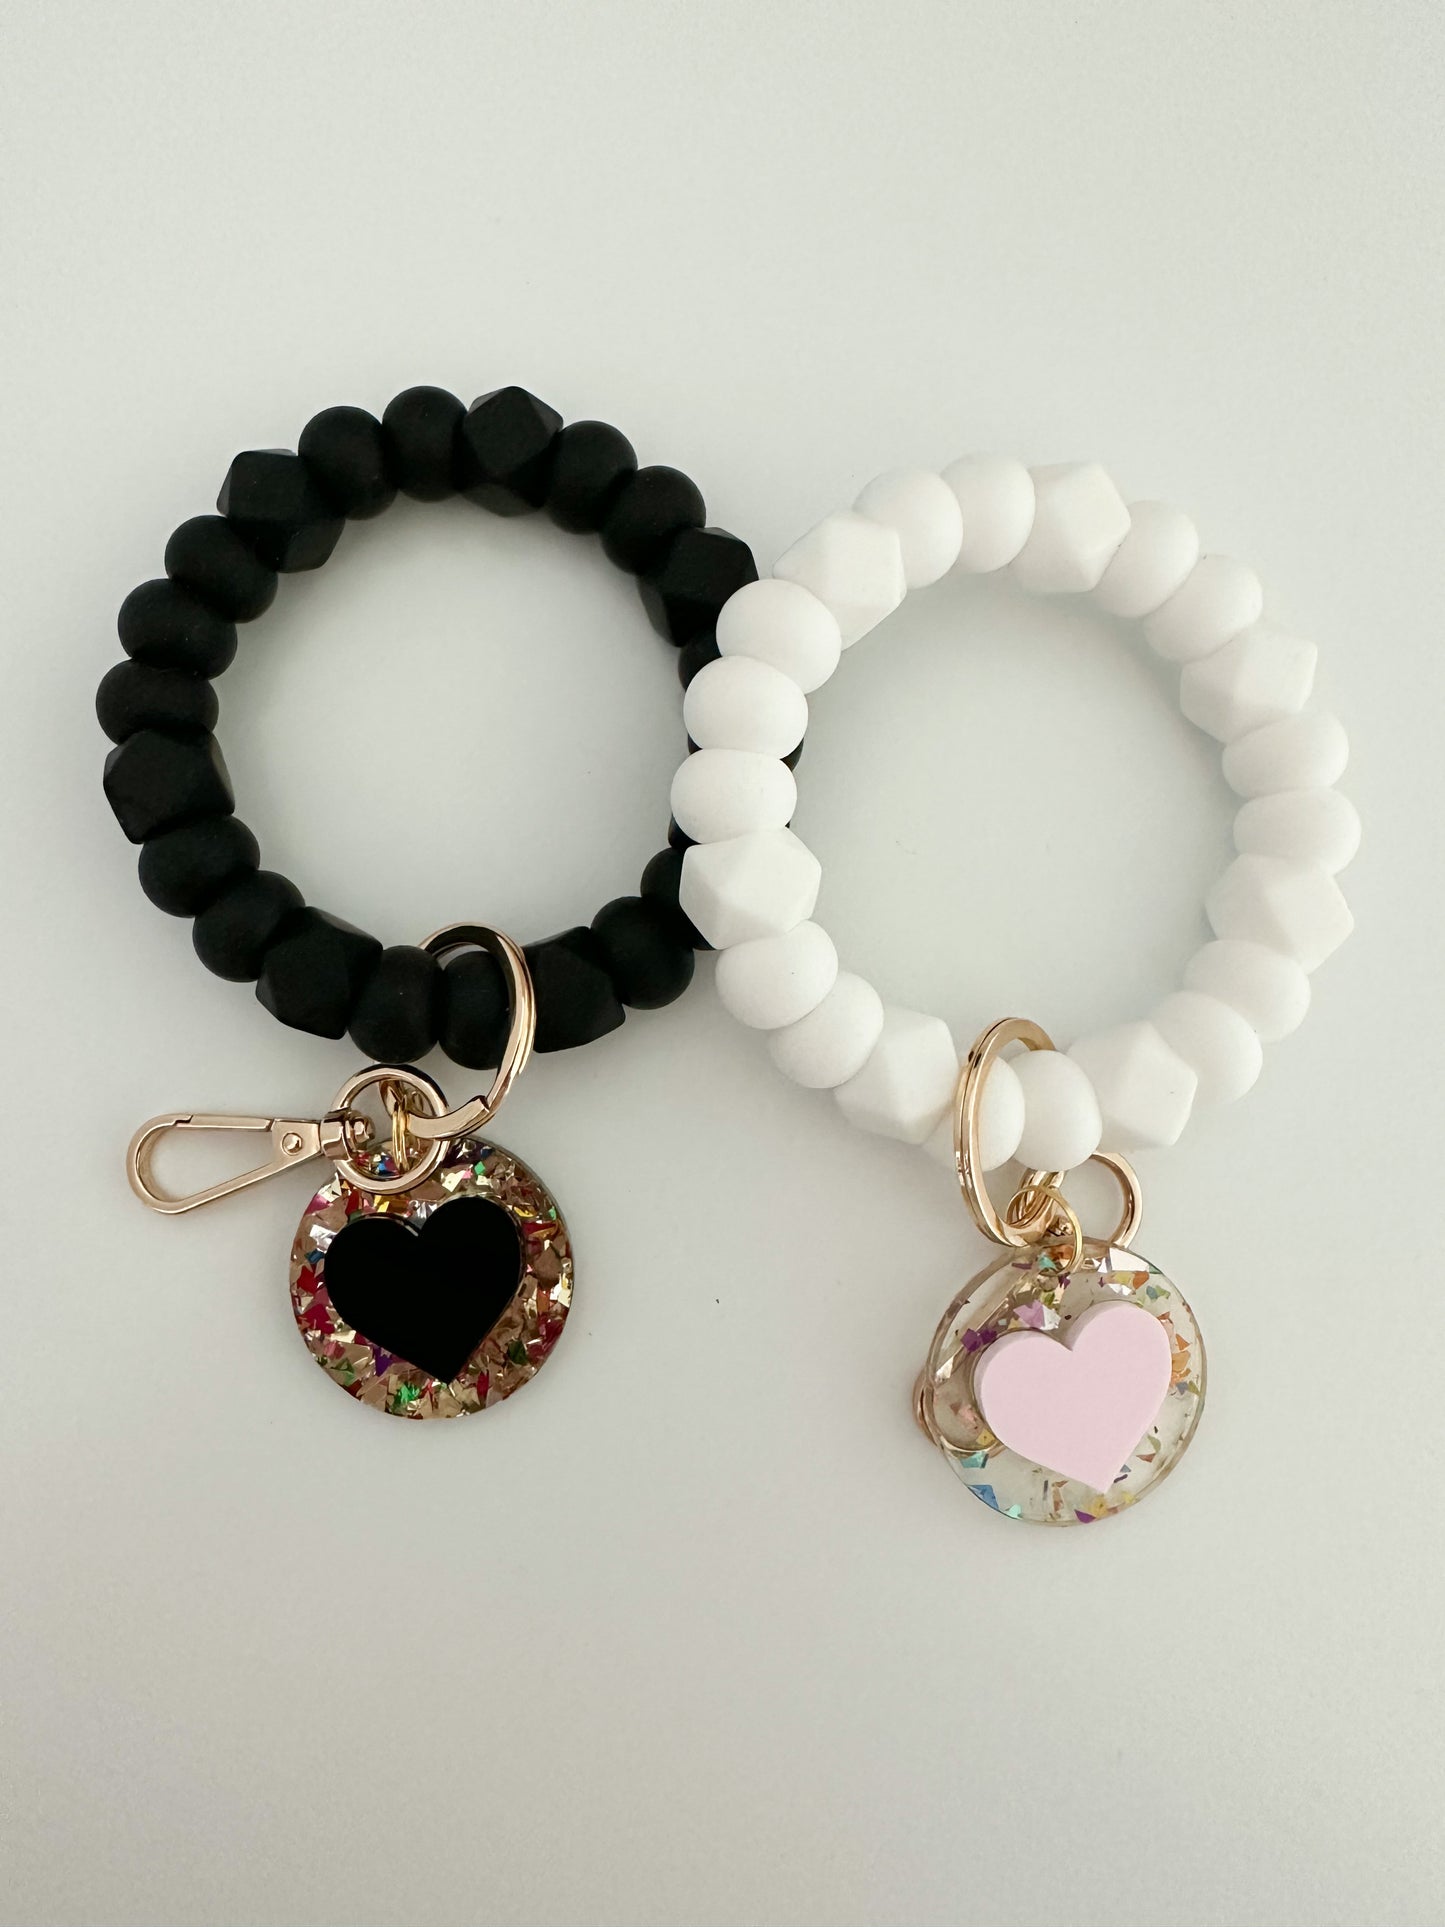 white and black with heart charm bundle / bracelet keychains